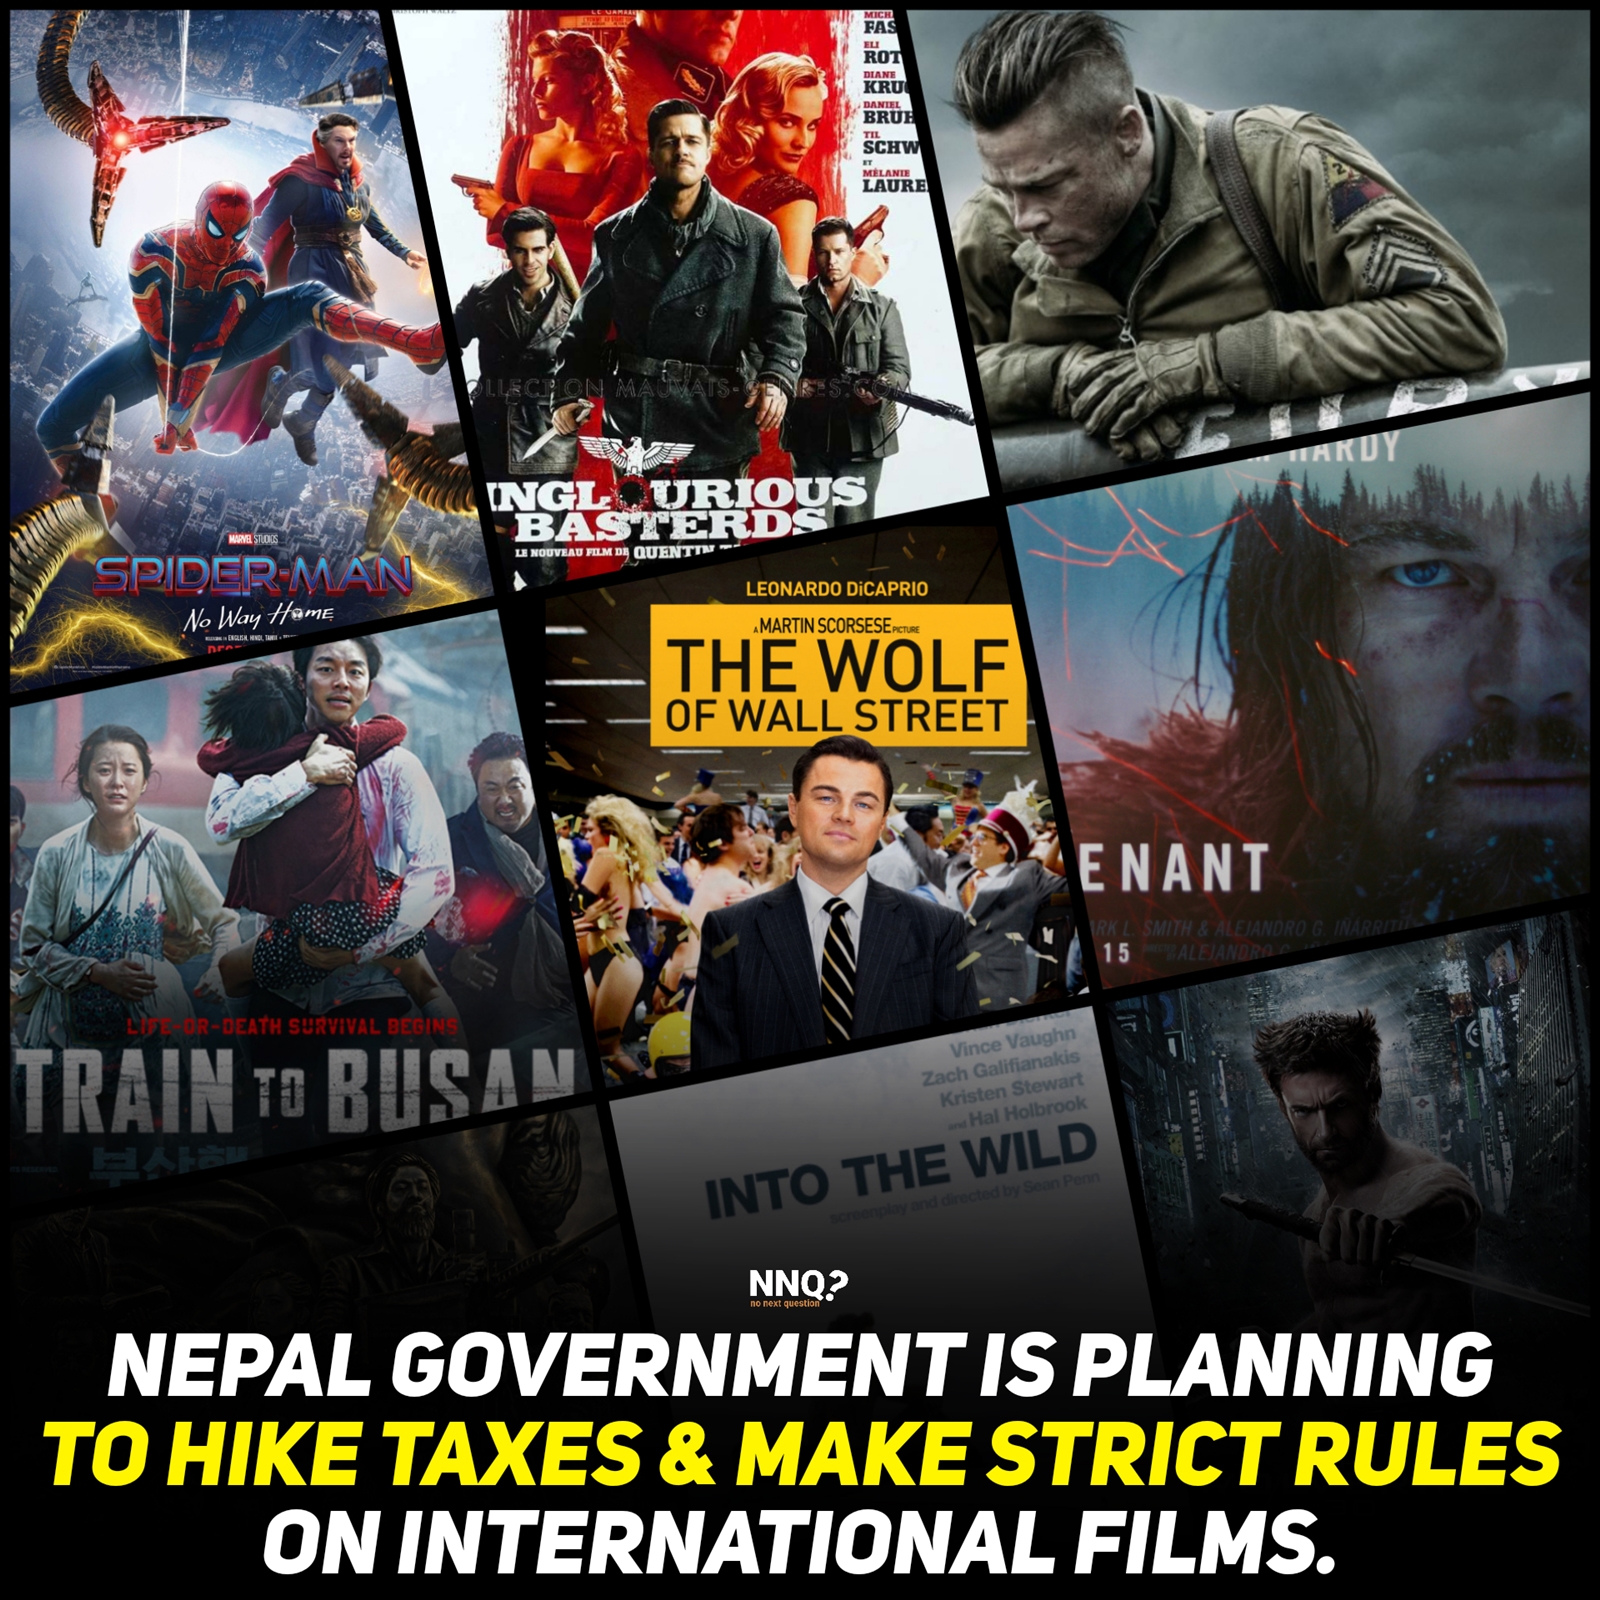 Nepal government plans to hike taxes on foreign films